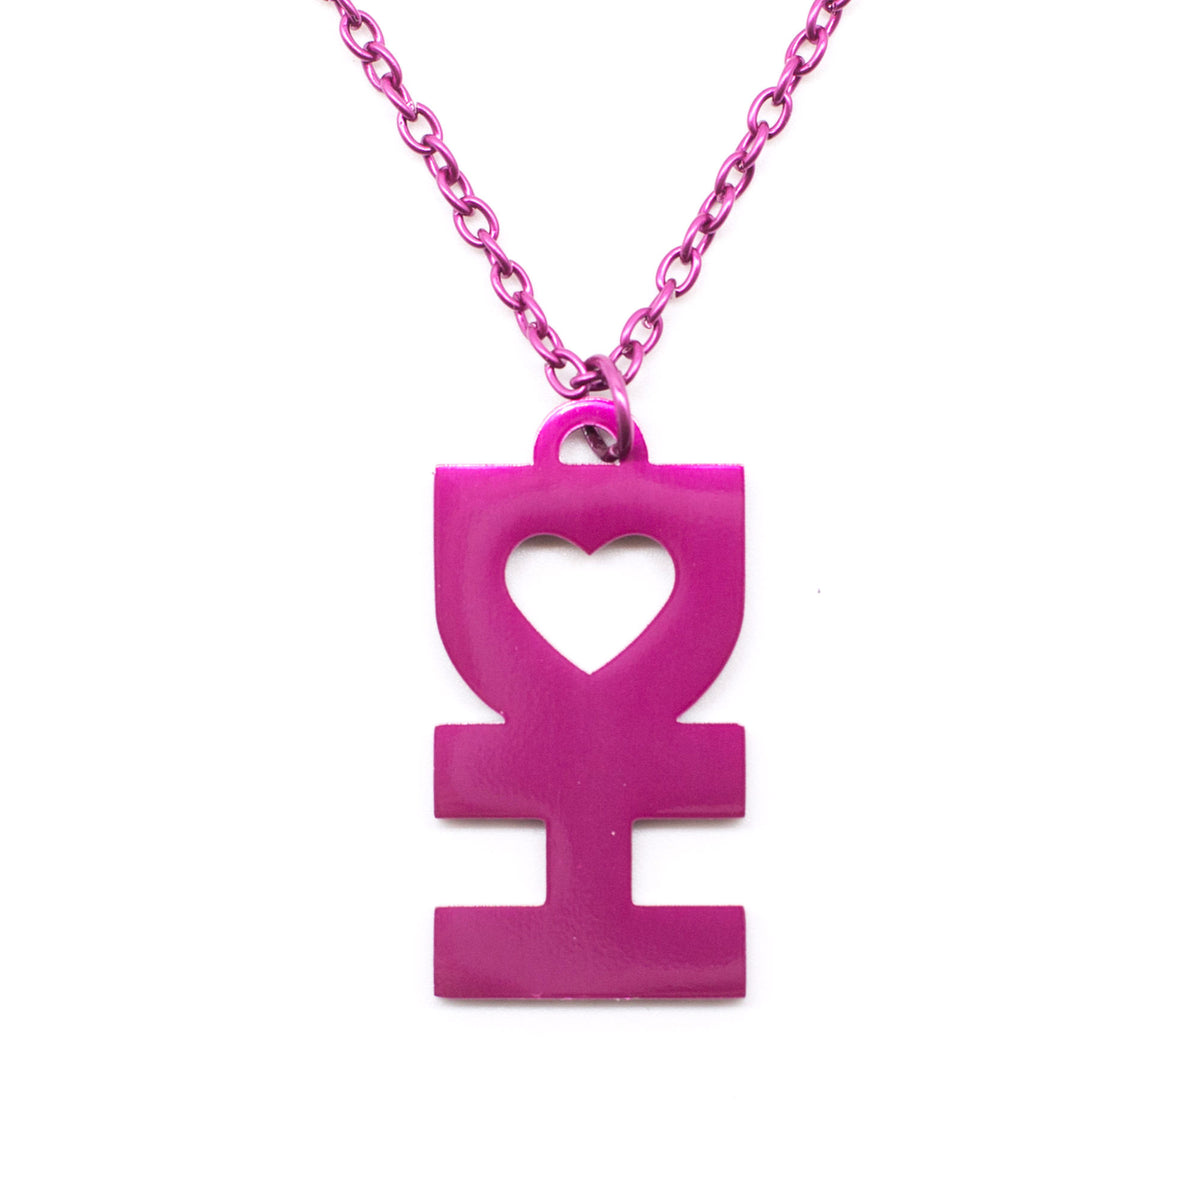 DH MAN NECKLACE IN GLOSSY PINK